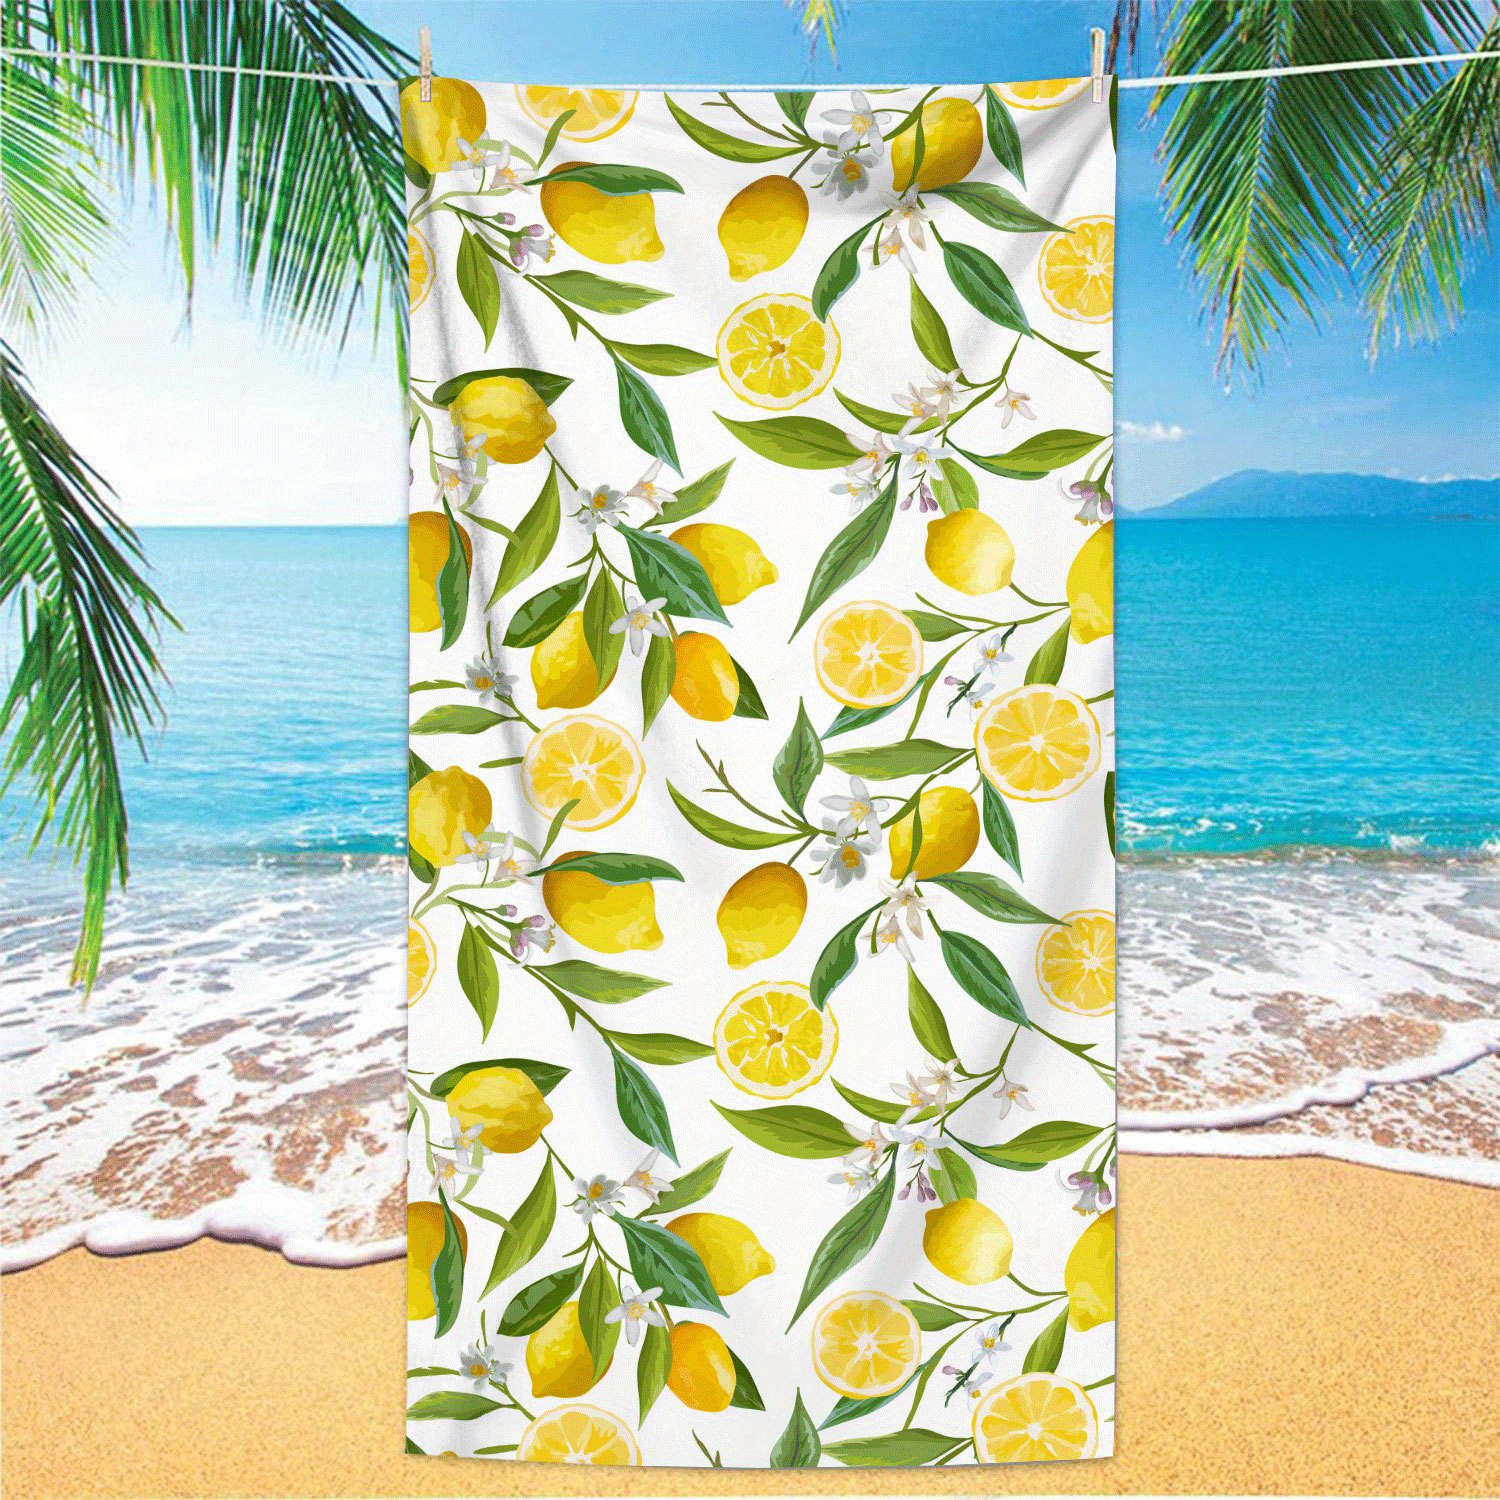 

1pc Lemon Pattern Beach Towel, Super Absorbent & Quick-drying Swimming Towel, Lightweight & Soft Beach Blanket, Suitable For Beach Swimming Outdoor Camping Travel, Ideal Beach Essentials